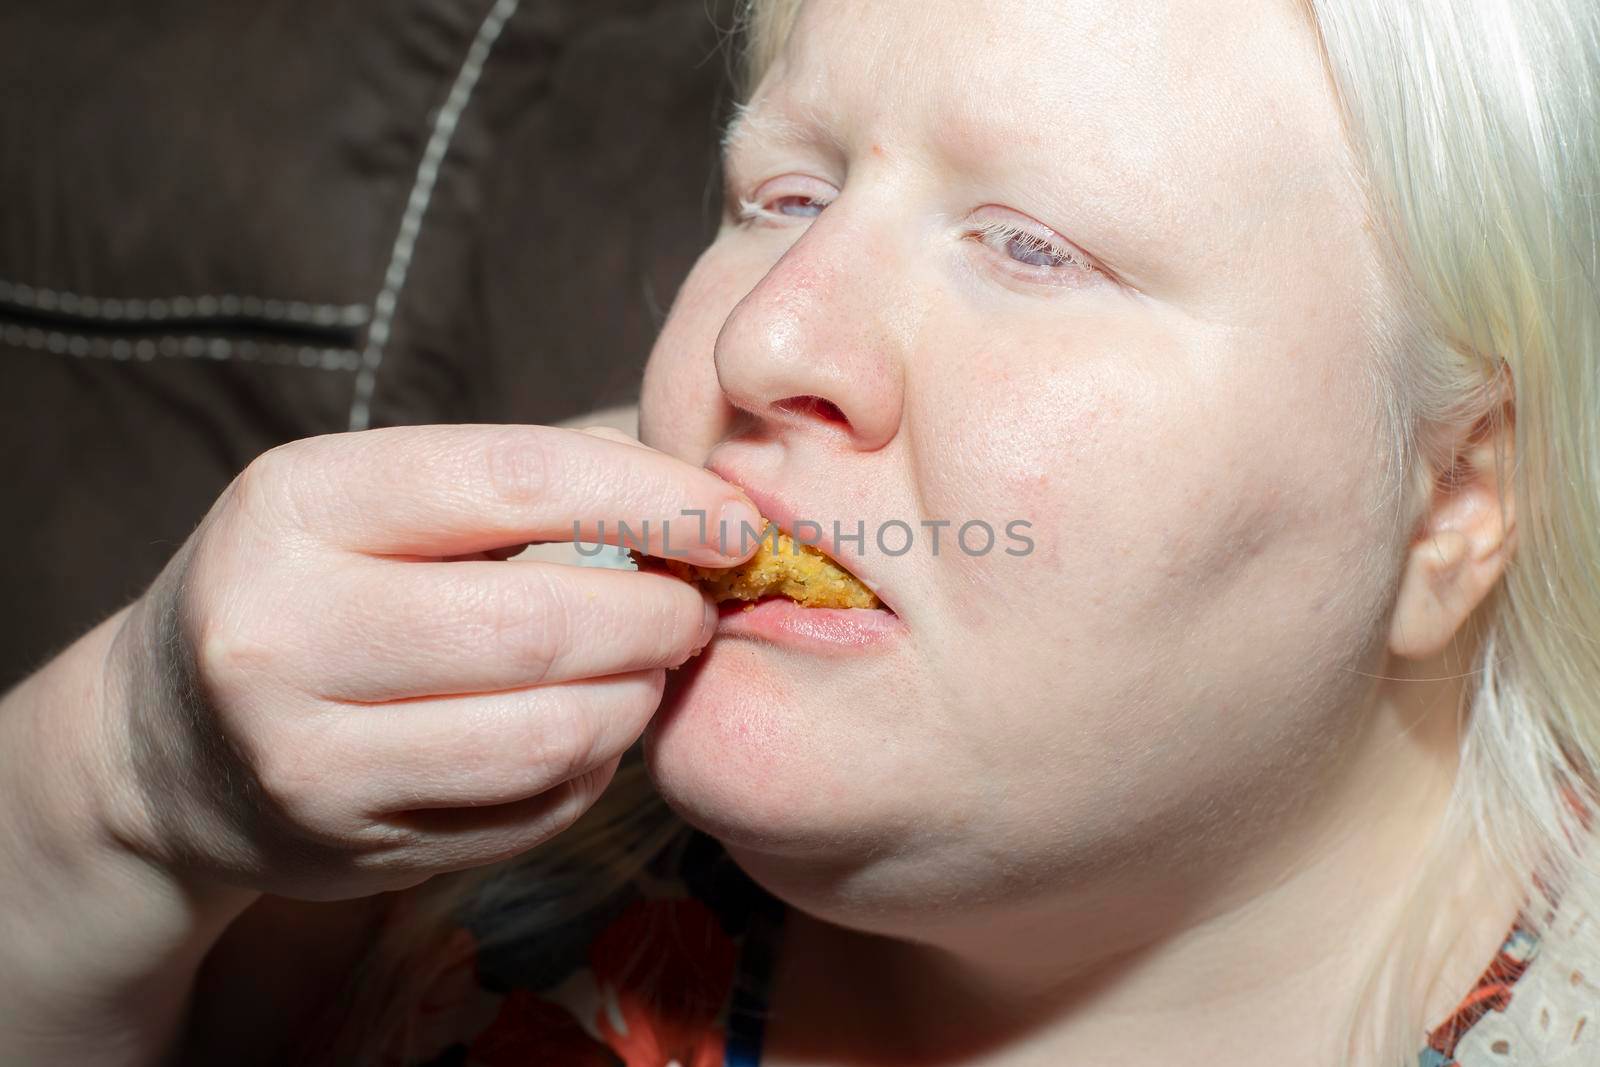 Woman Eating Fried Pickles by tornado98